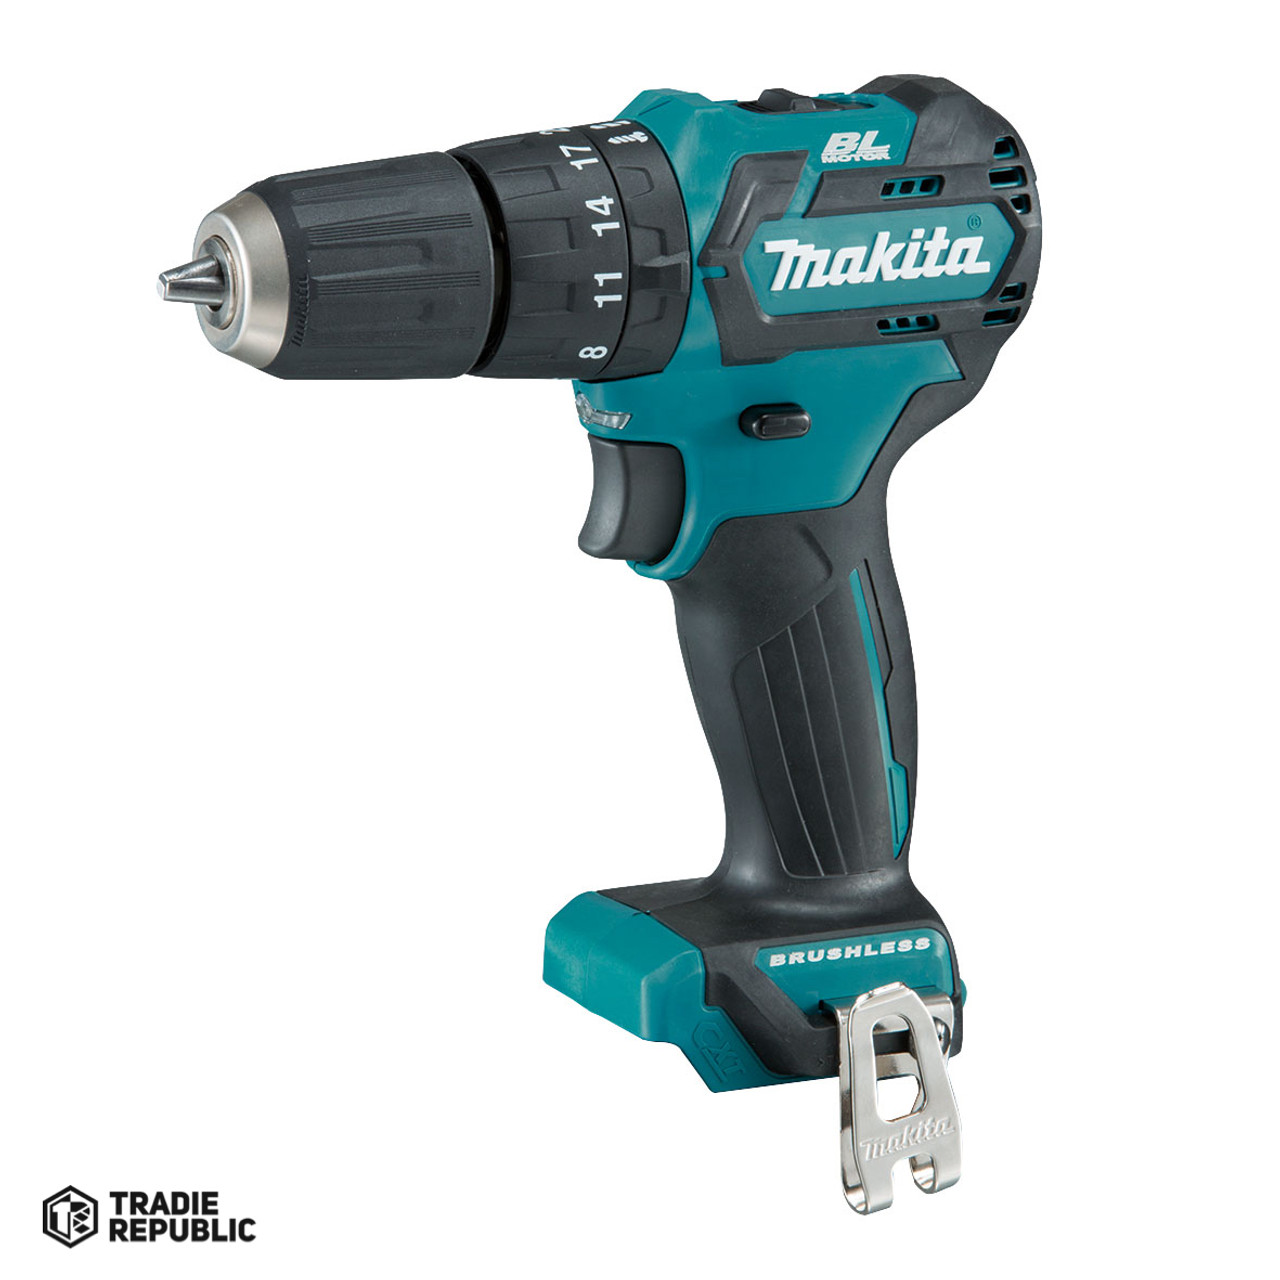 HP332DZ Makita 12Vmax CXT Cordless Brushless Hammer Drill Driver Bare tool only